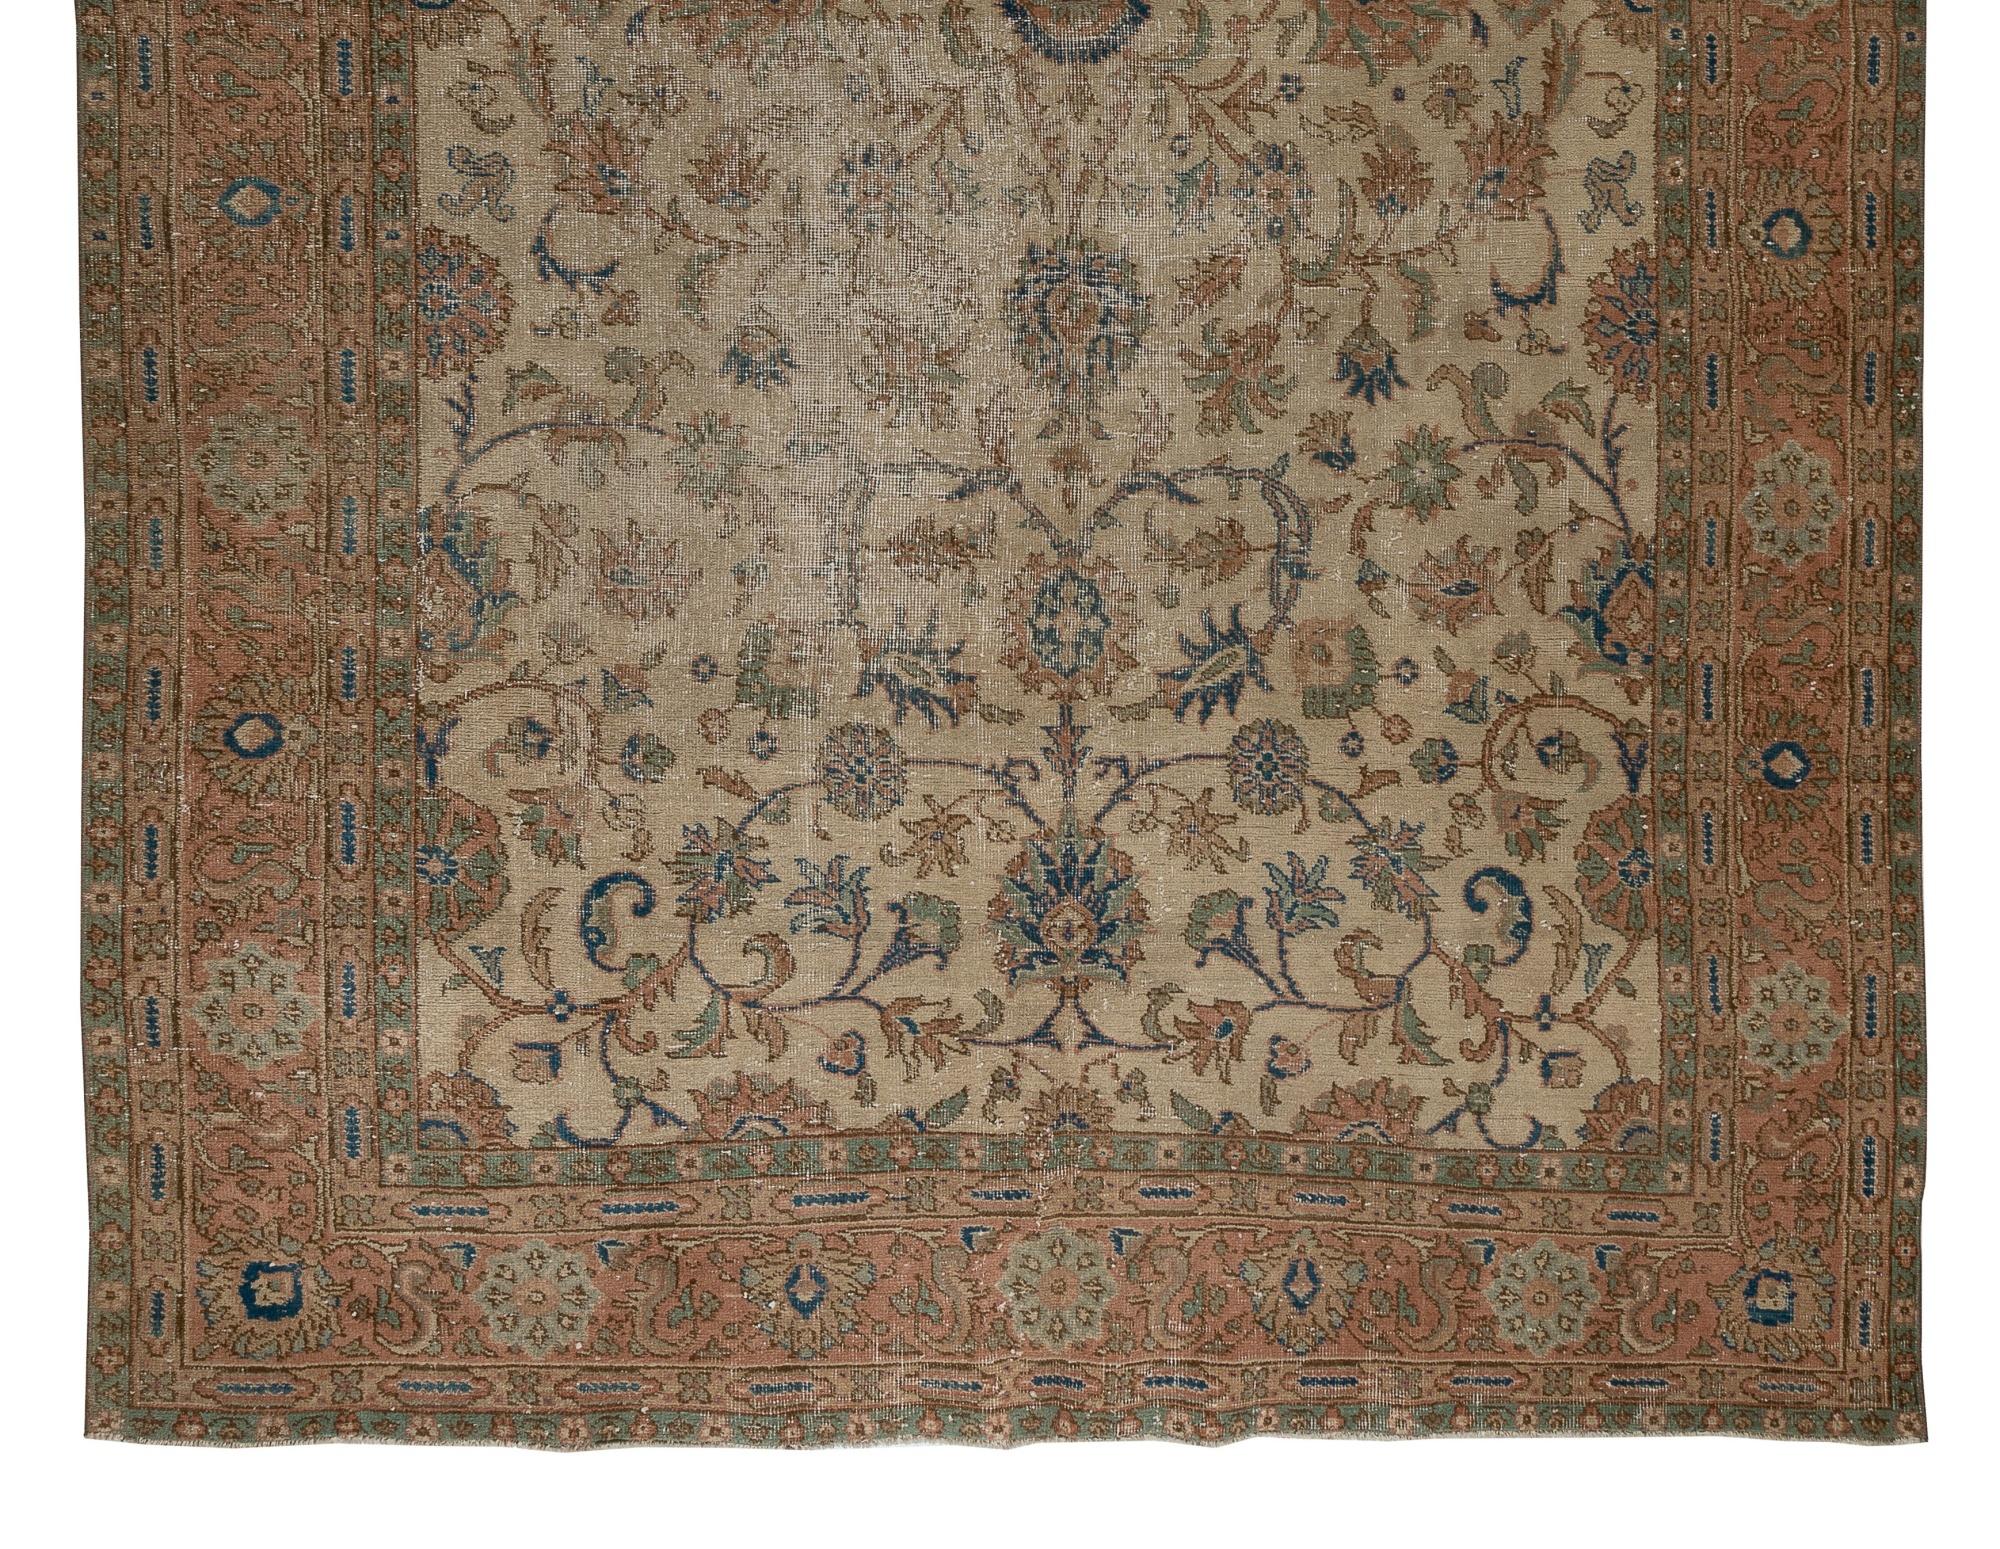 Turkish 7x10.5 Ft Midcentury Handmade Oushak Area Rug in Beige with Floral Design For Sale